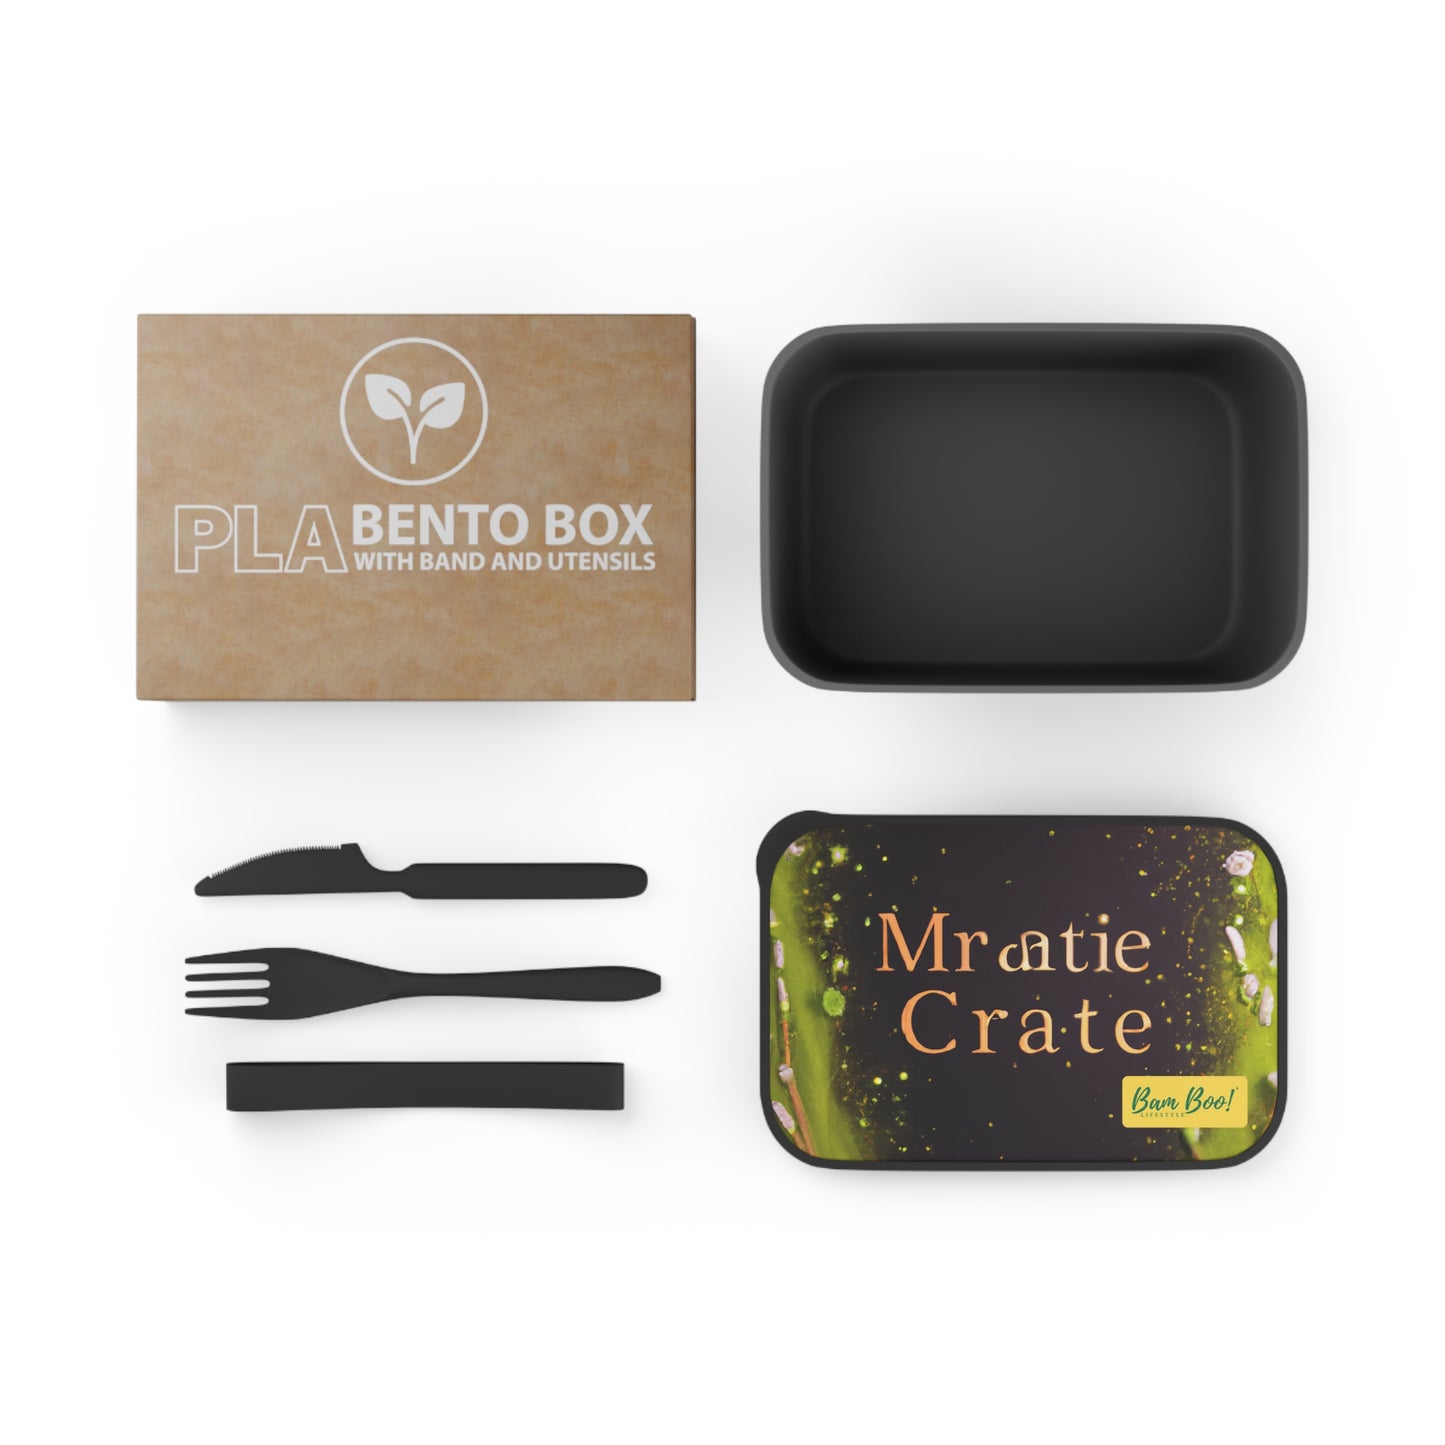 "Capturing Emotion: An Artistic Visual Storytelling Collage" - Bam Boo! Lifestyle Eco-friendly PLA Bento Box with Band and Utensils